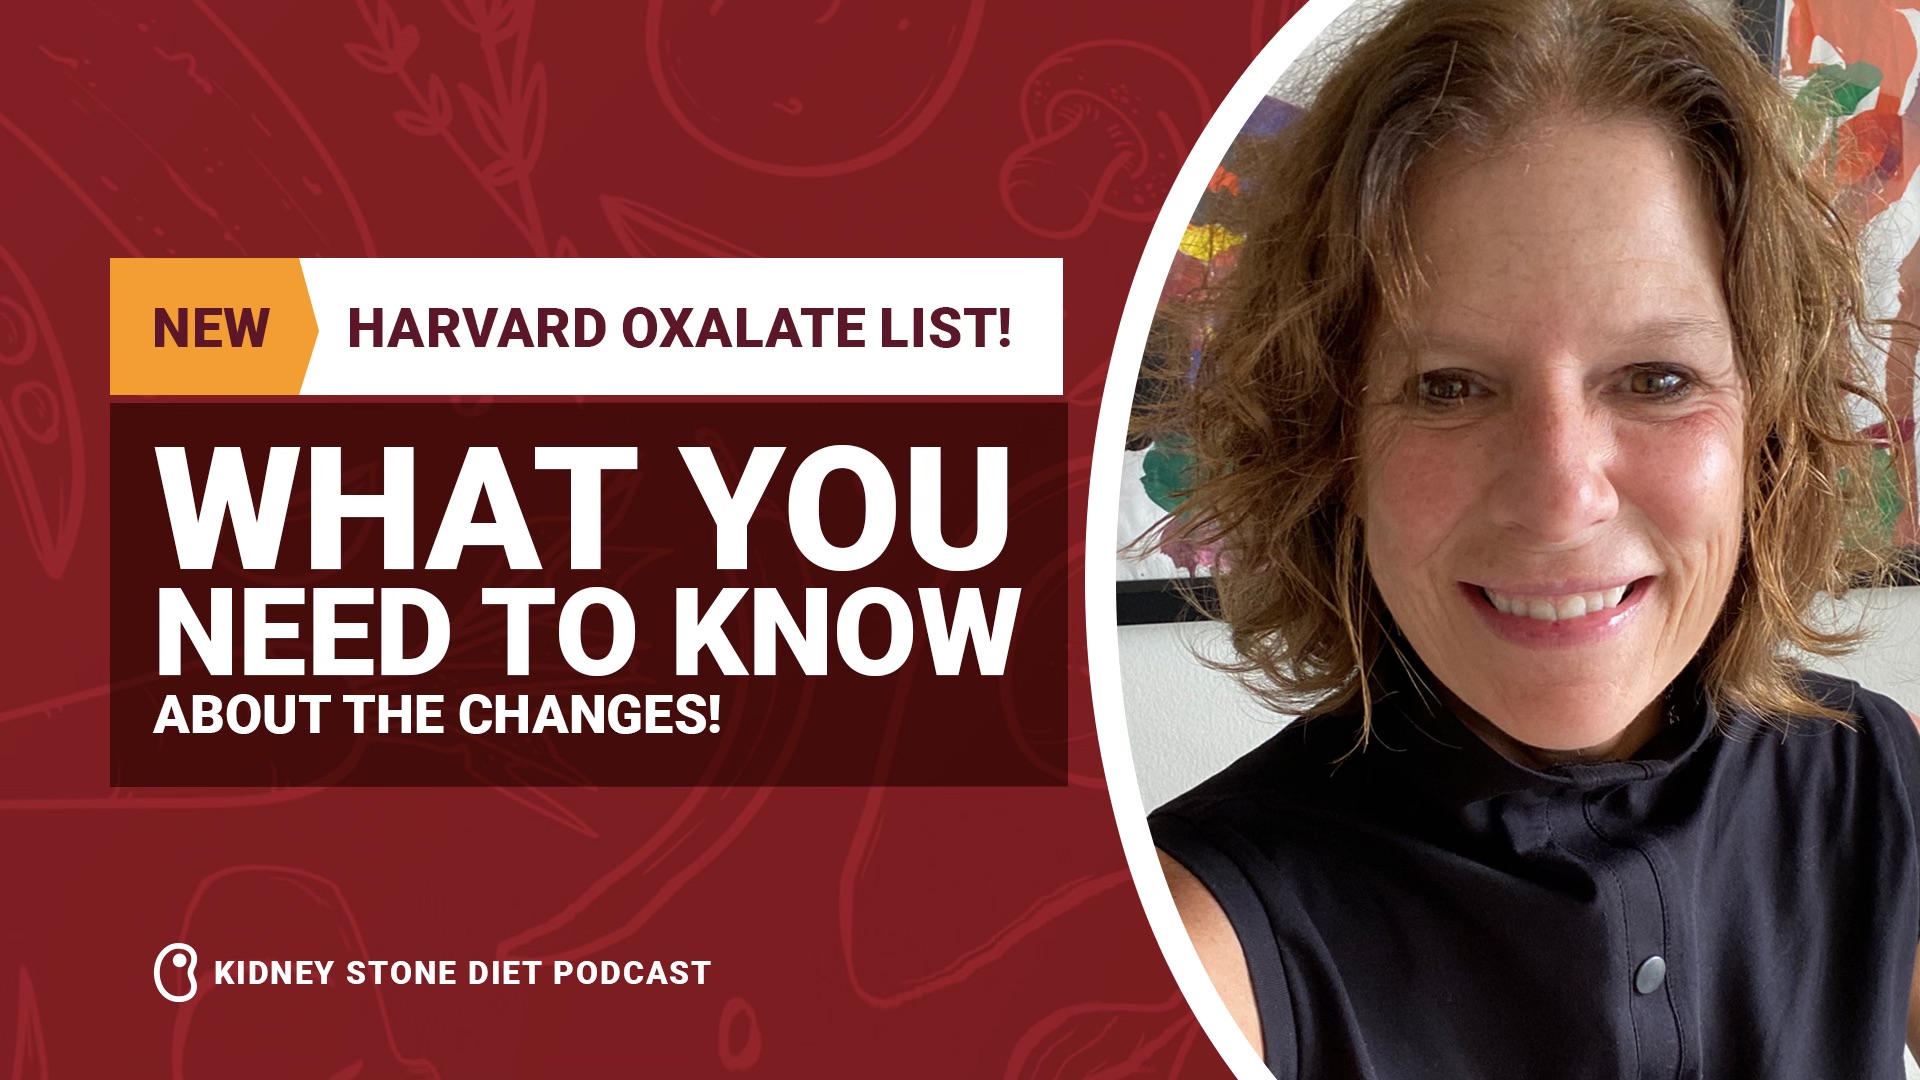 🚨 New Harvard oxalate list! 🚨 What you need to know about the changes!